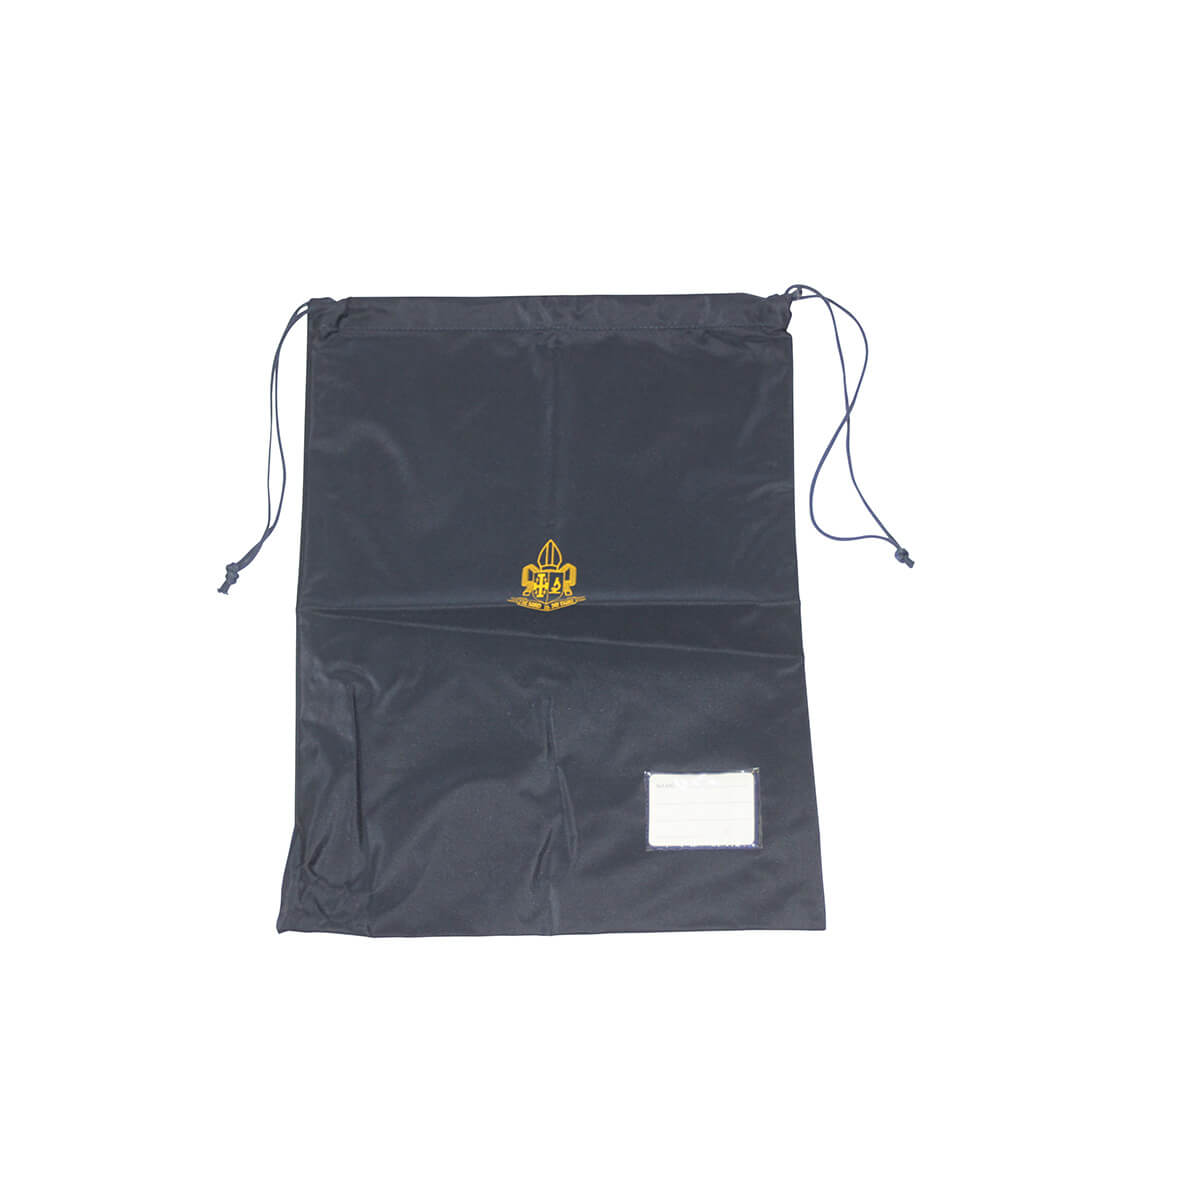 OACC Library Bag | Overnewton Anglican Community College | Noone